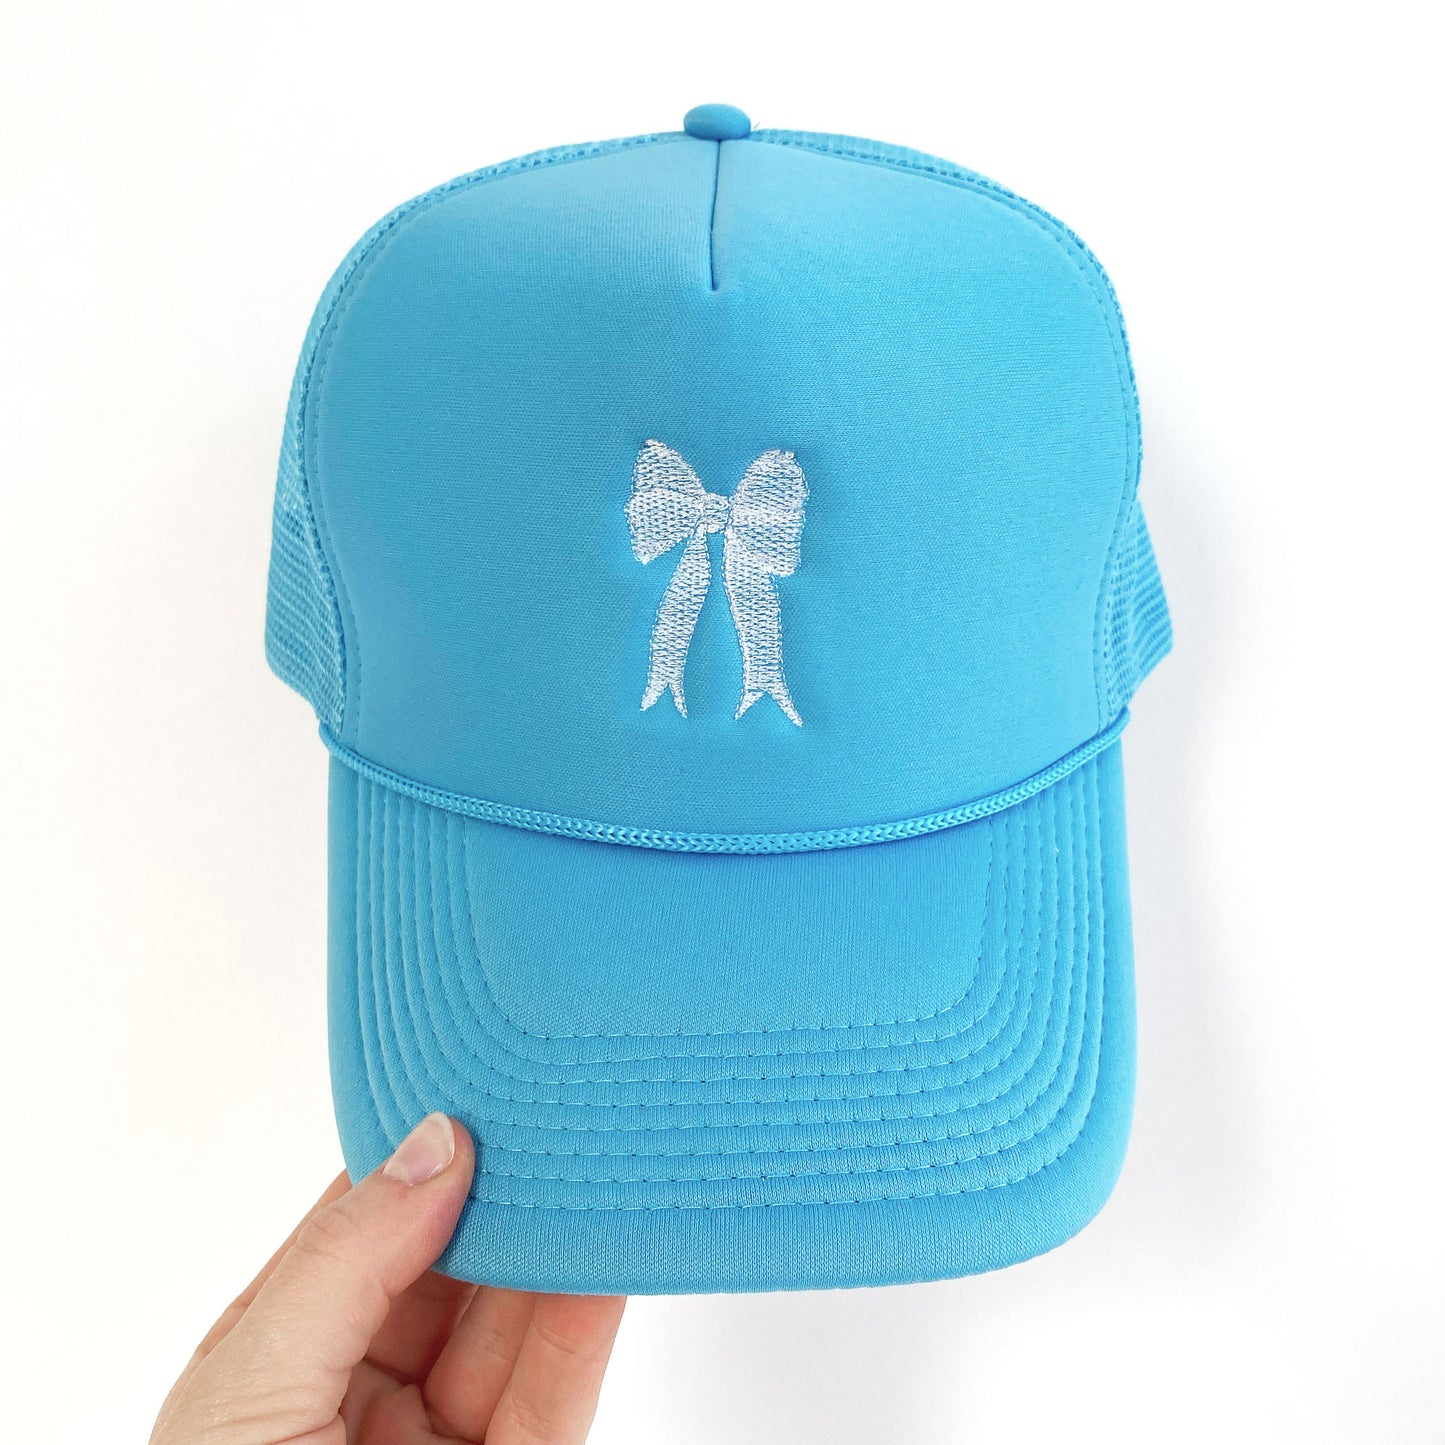 sky blue trucker hat with embroidered white bow